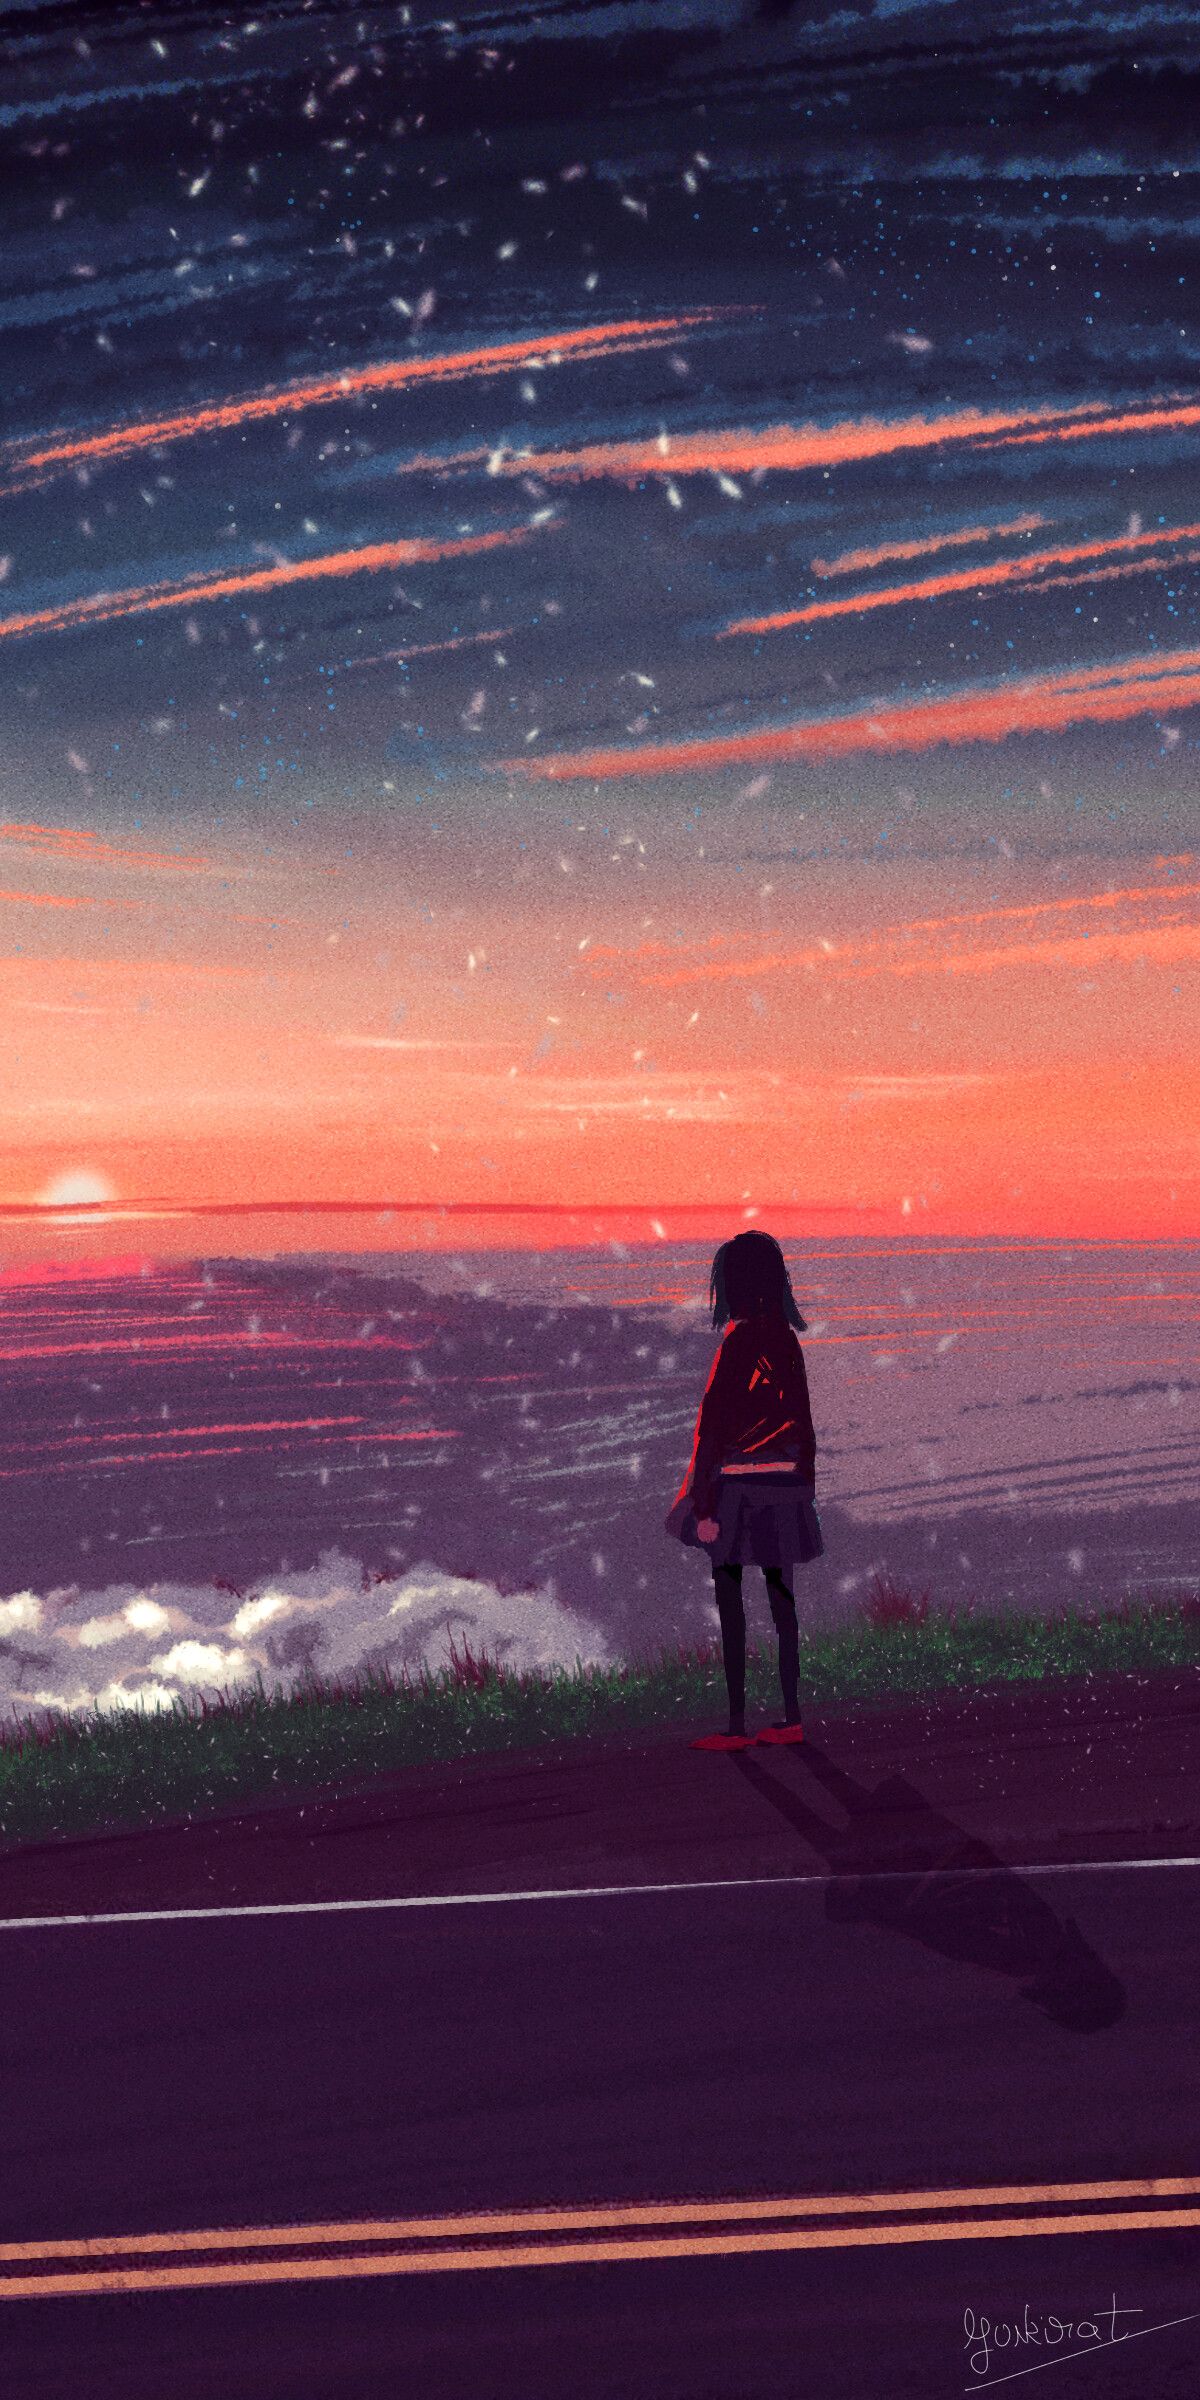 A person standing on the side of road - Anime sunset